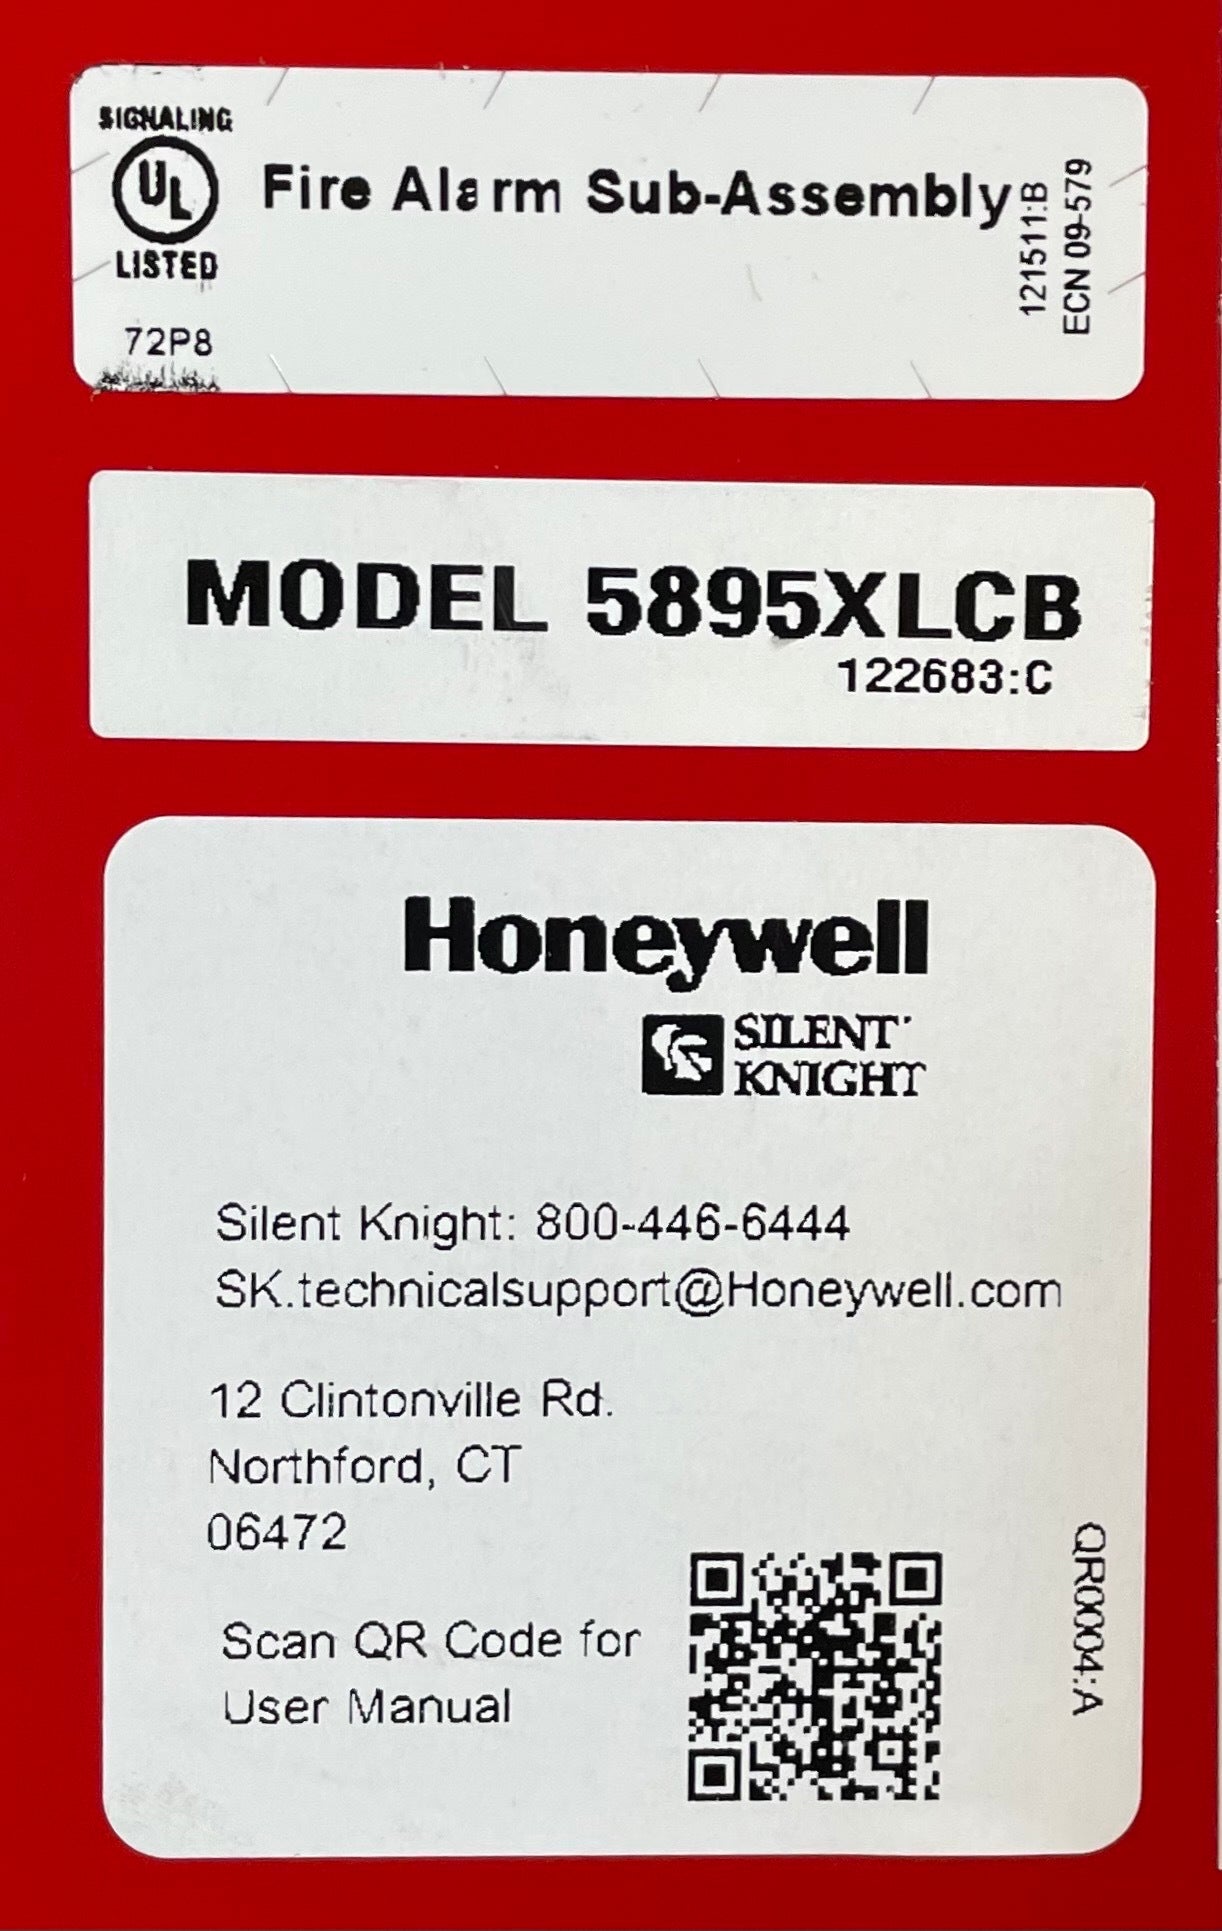 Silent Knight 005895XLCB - The Fire Alarm Supplier